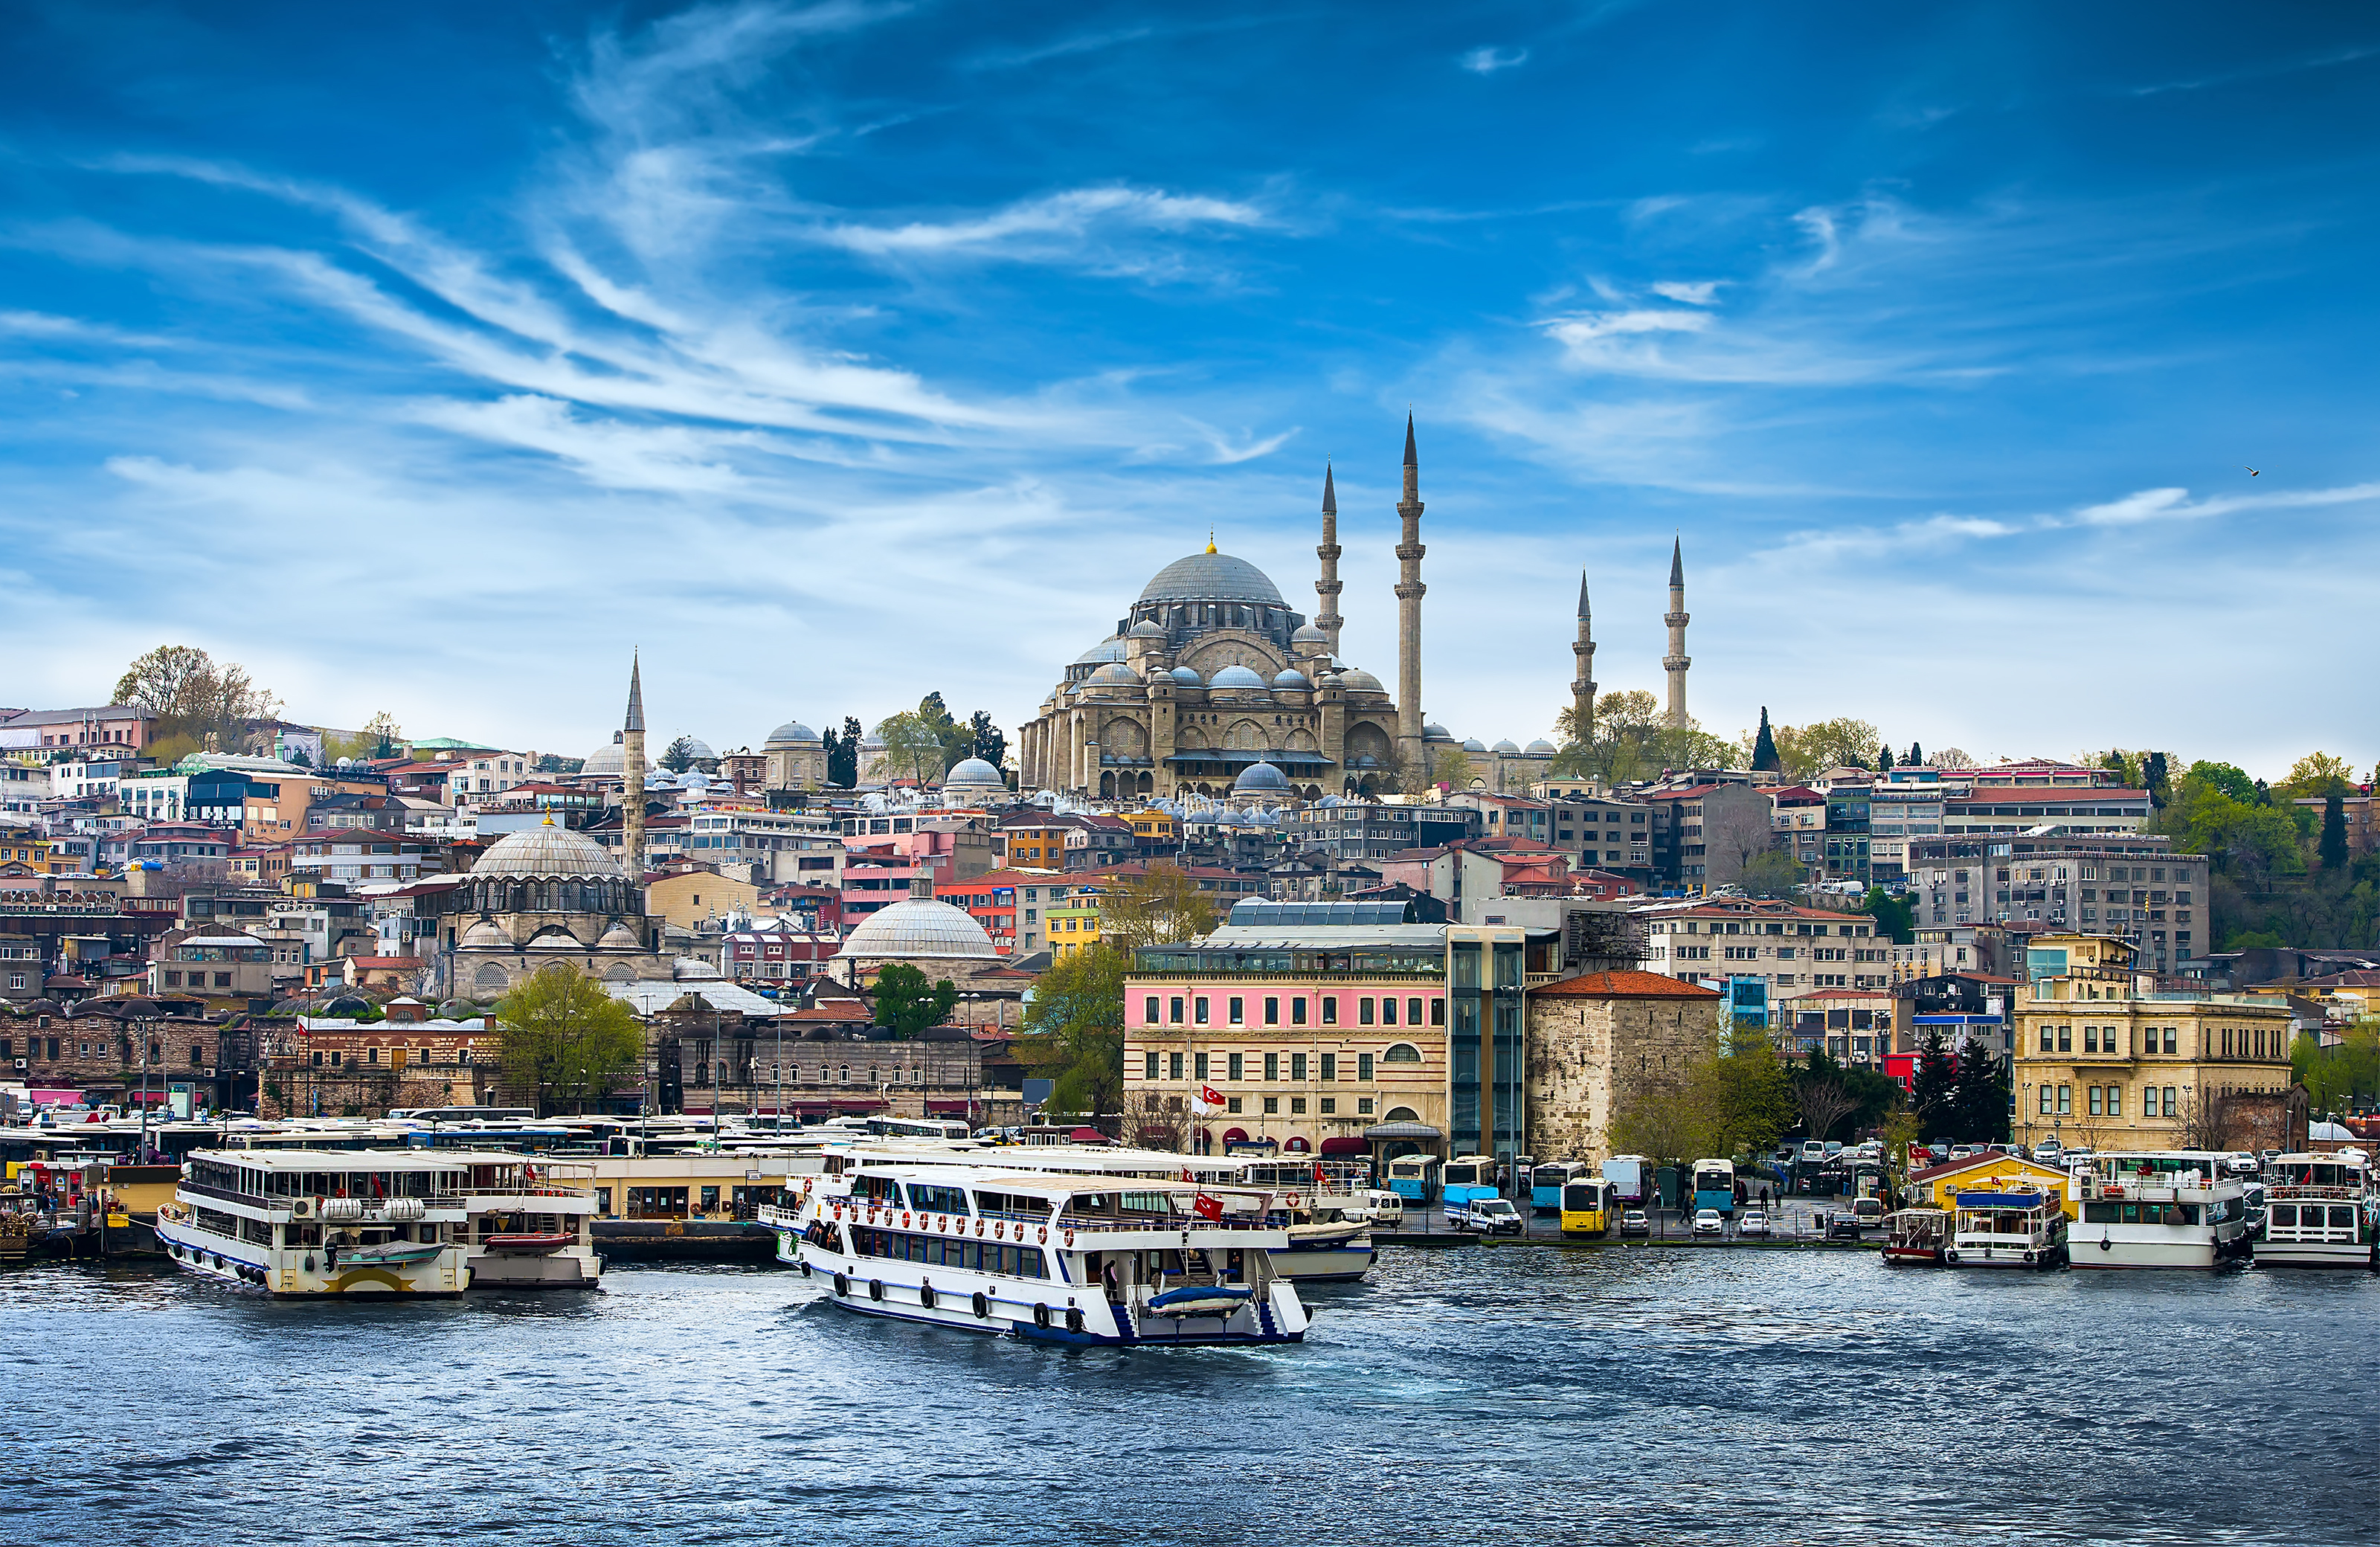 Istanbul – Where East meets West